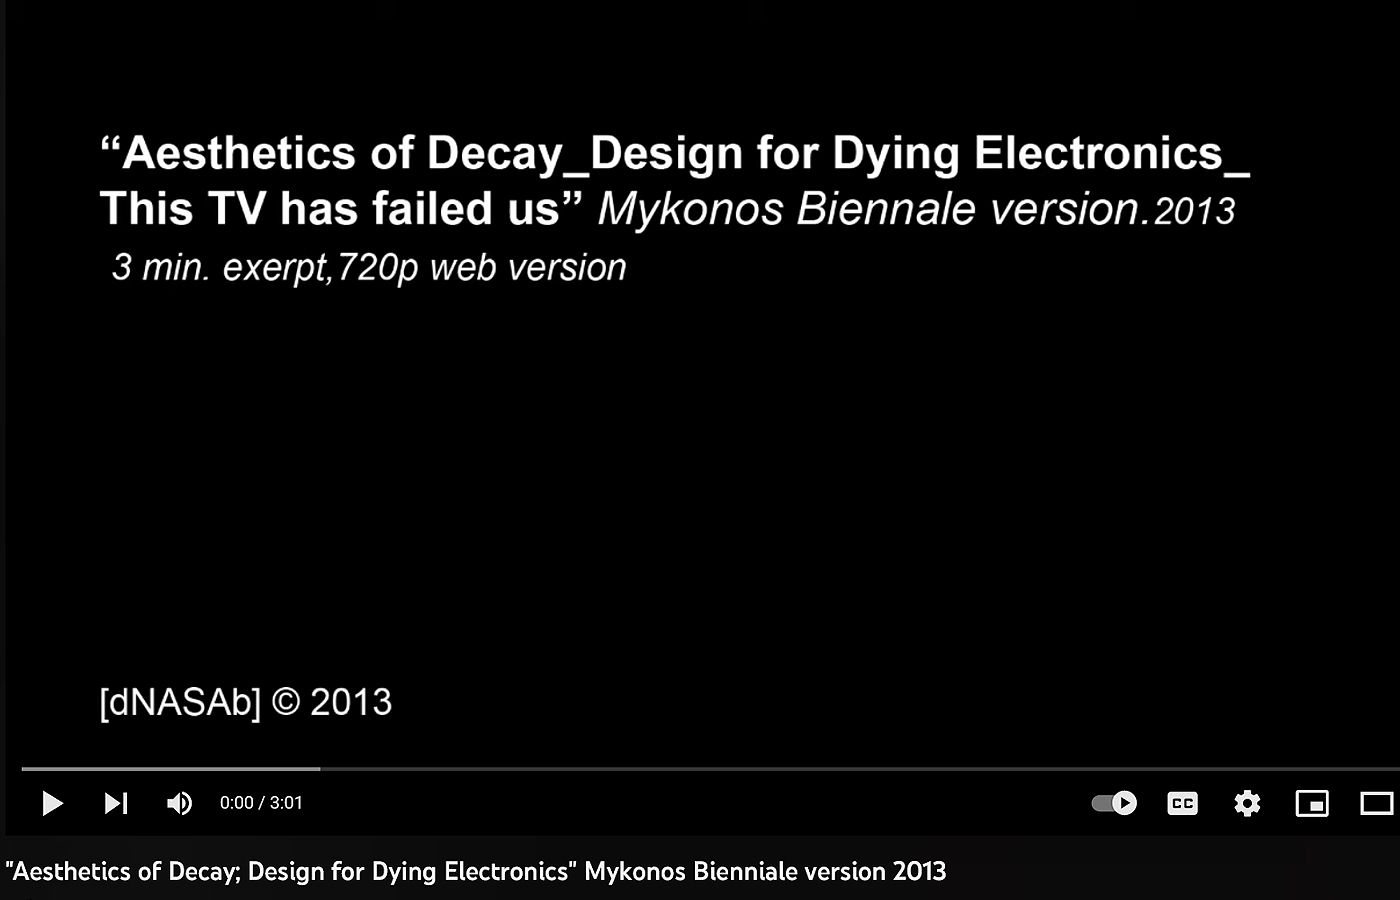 "Aesthetics of Decay; Design for Dying Electronics" Mykonos Bienniale version 2013